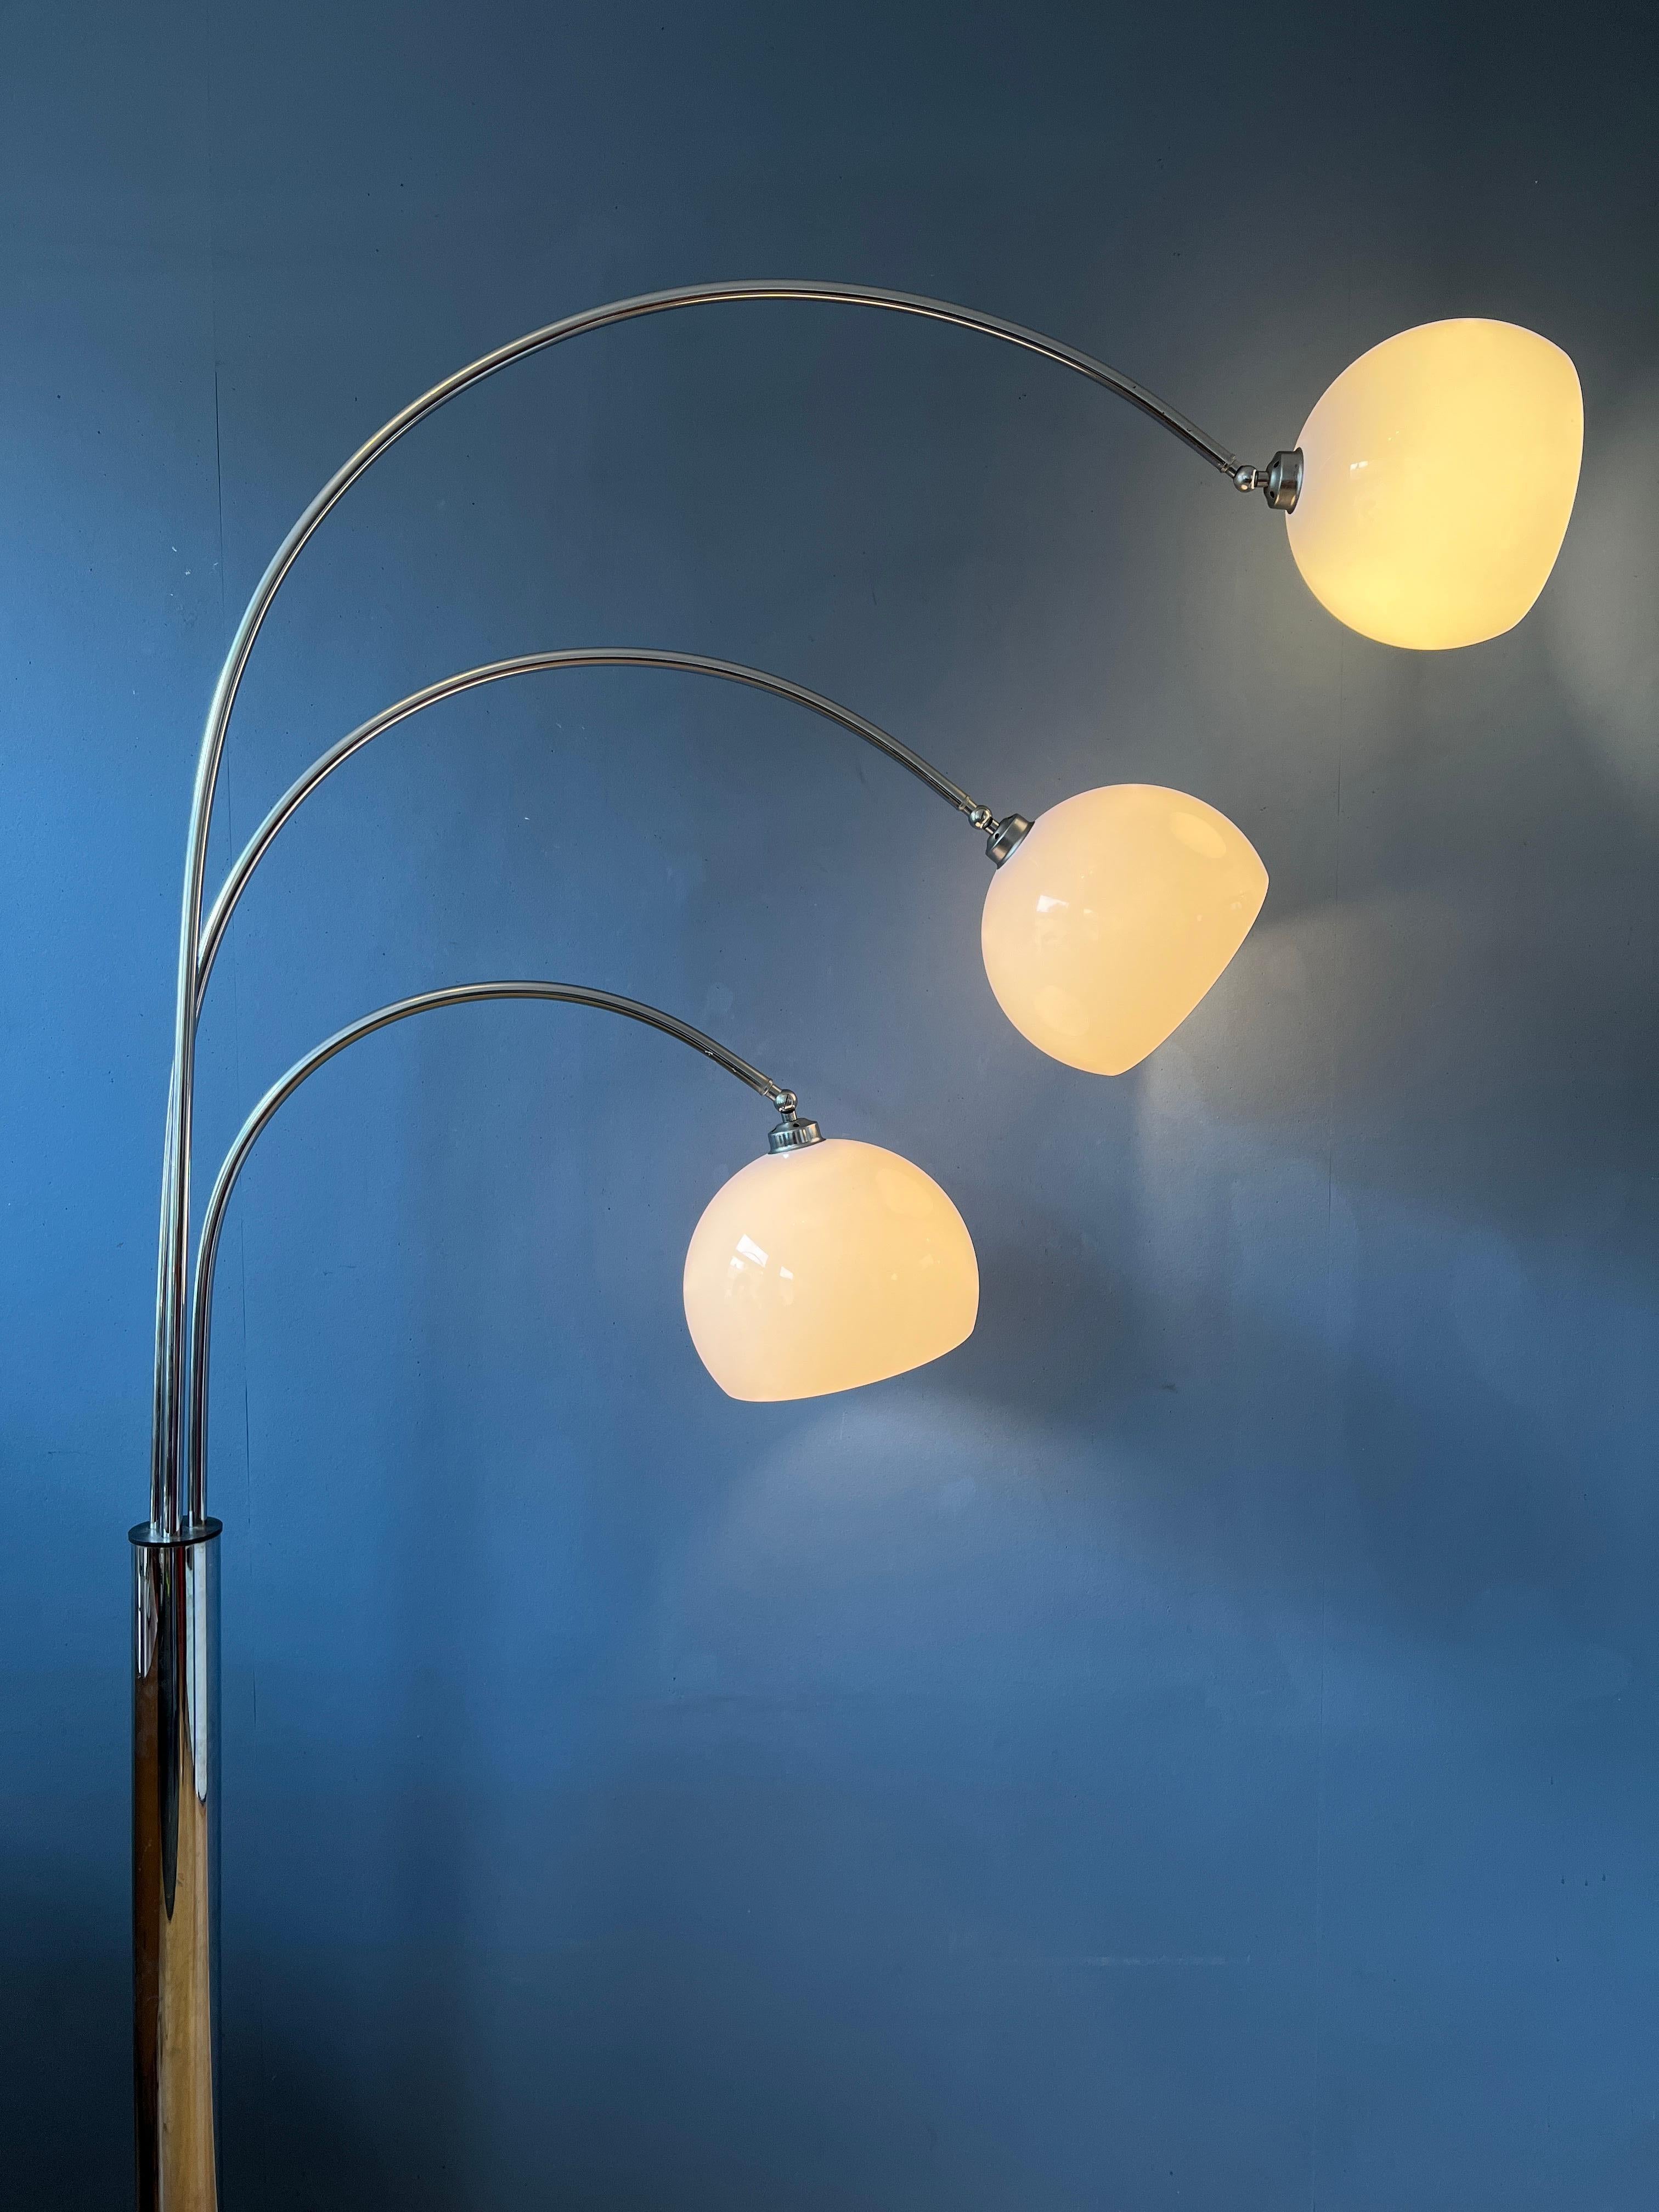 Big, majestic triple arc floor lamp by Goffredo Reggiani for Guzzini. All arcs can be positioned in different directions and the shades can be fixated upwards or downwards. The lamp requires three E27 lightbulbs and currently has an EU-plug.

The